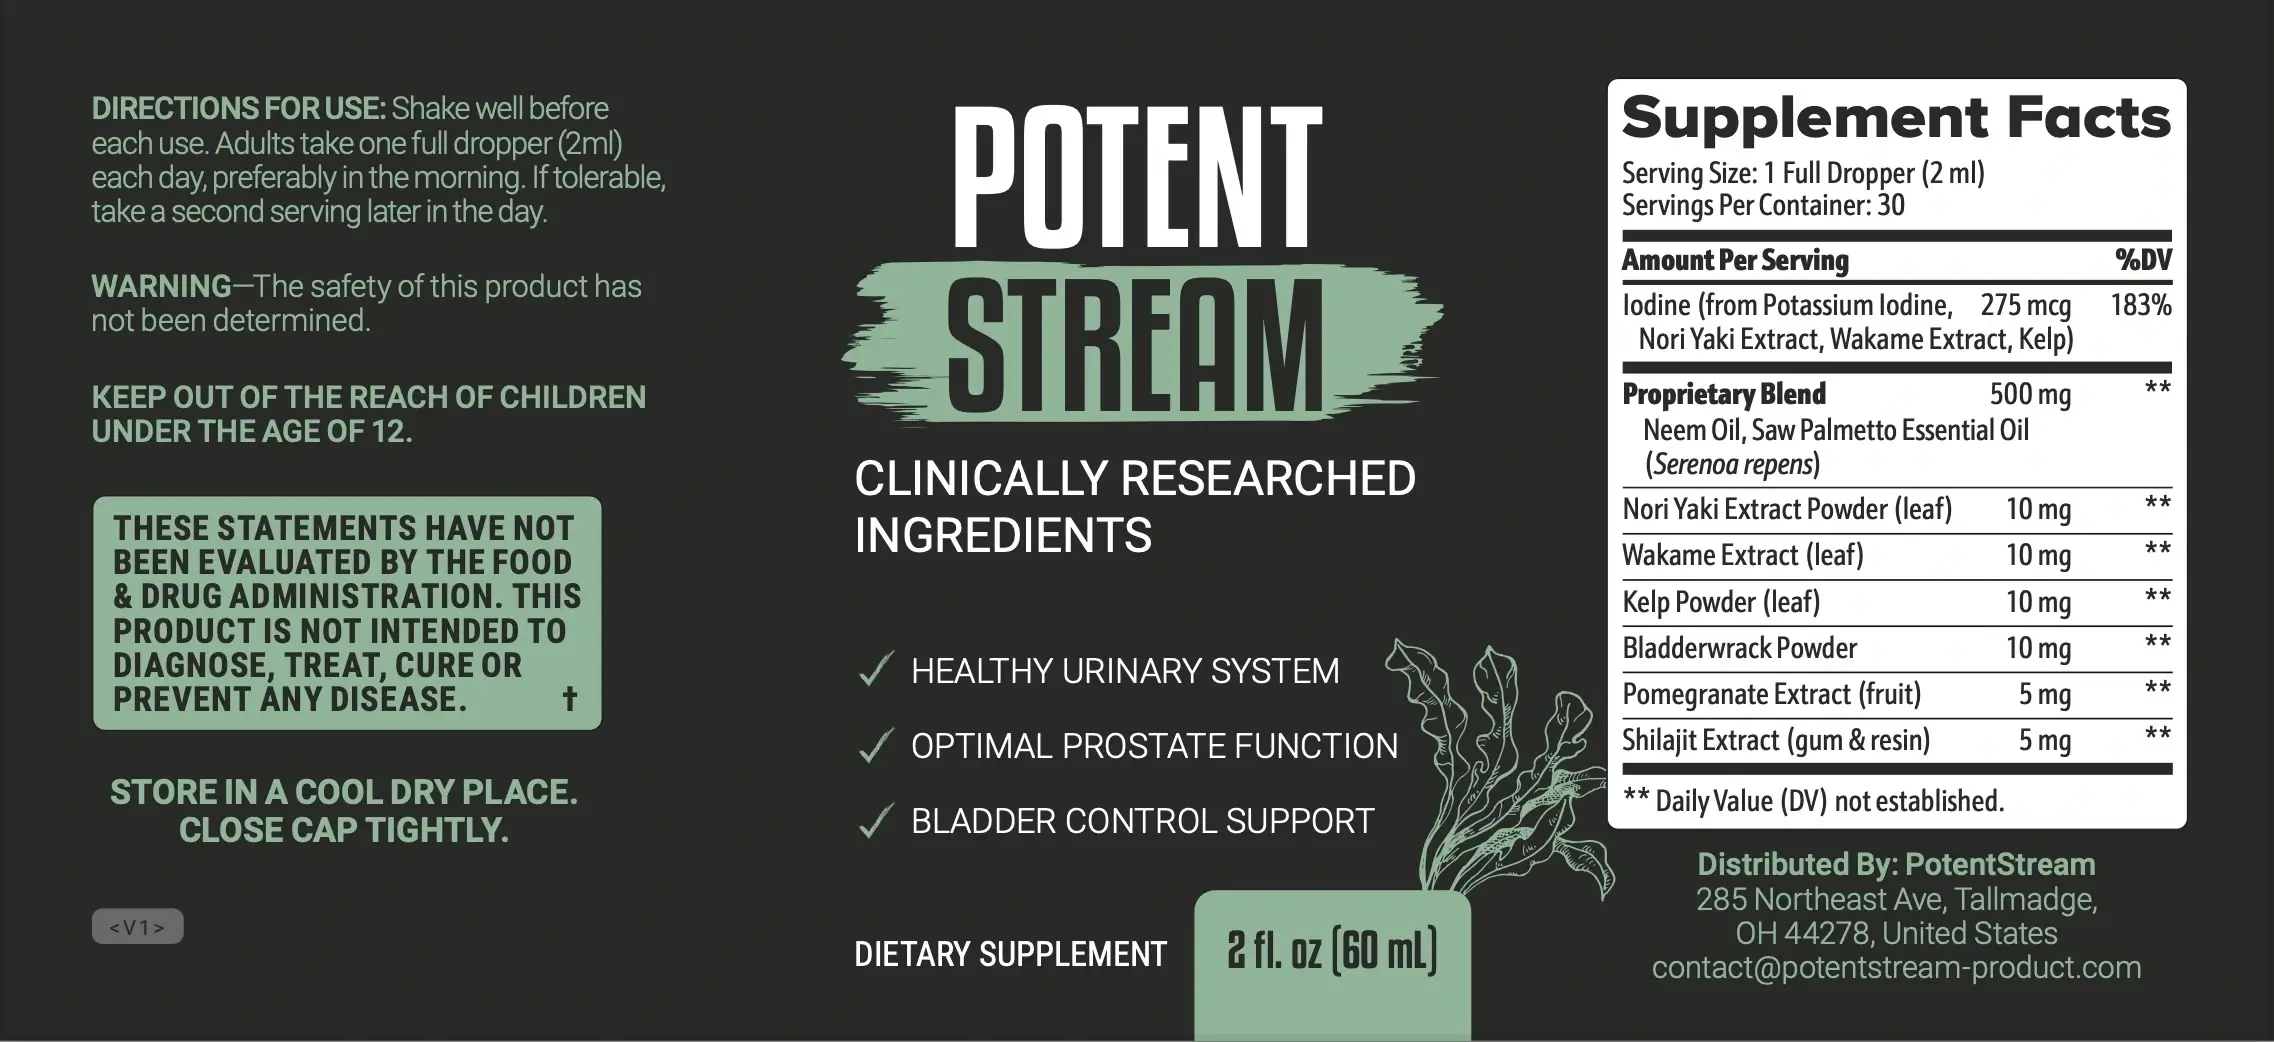 potent stream supplement facts